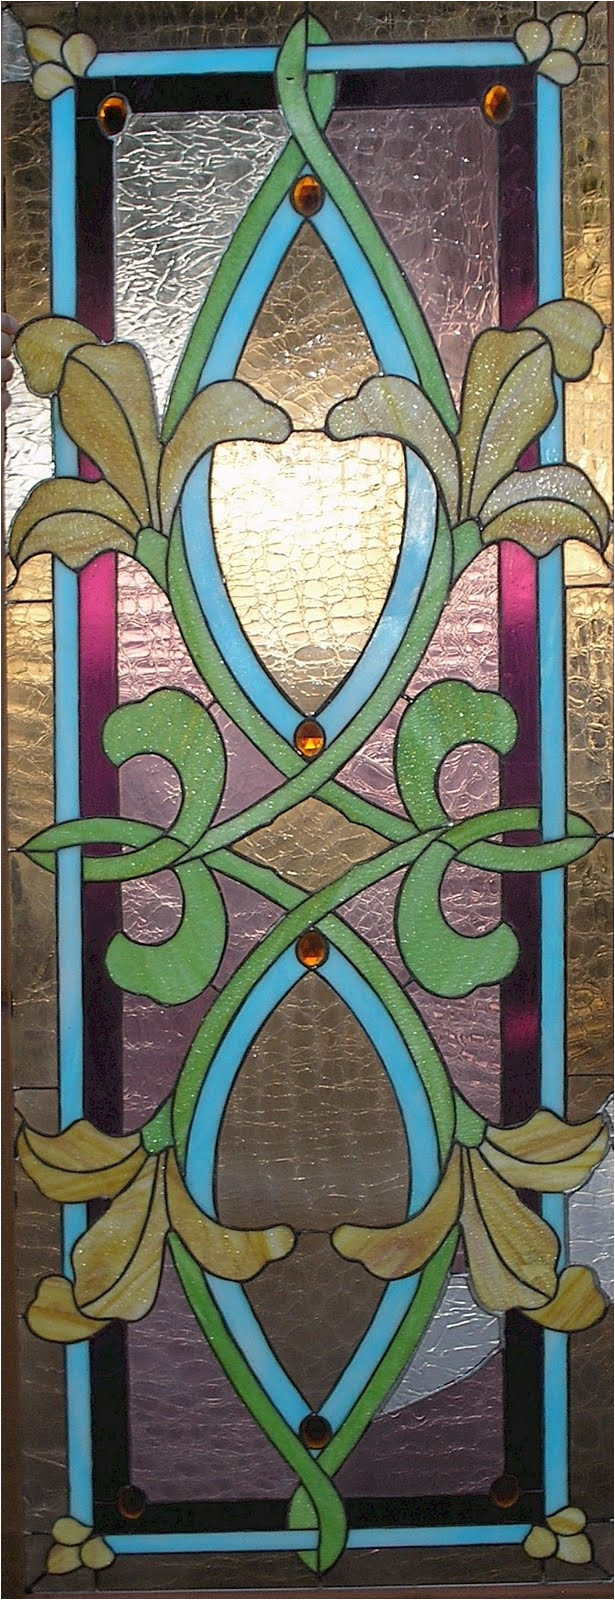 design reflects the earth and celtic theme